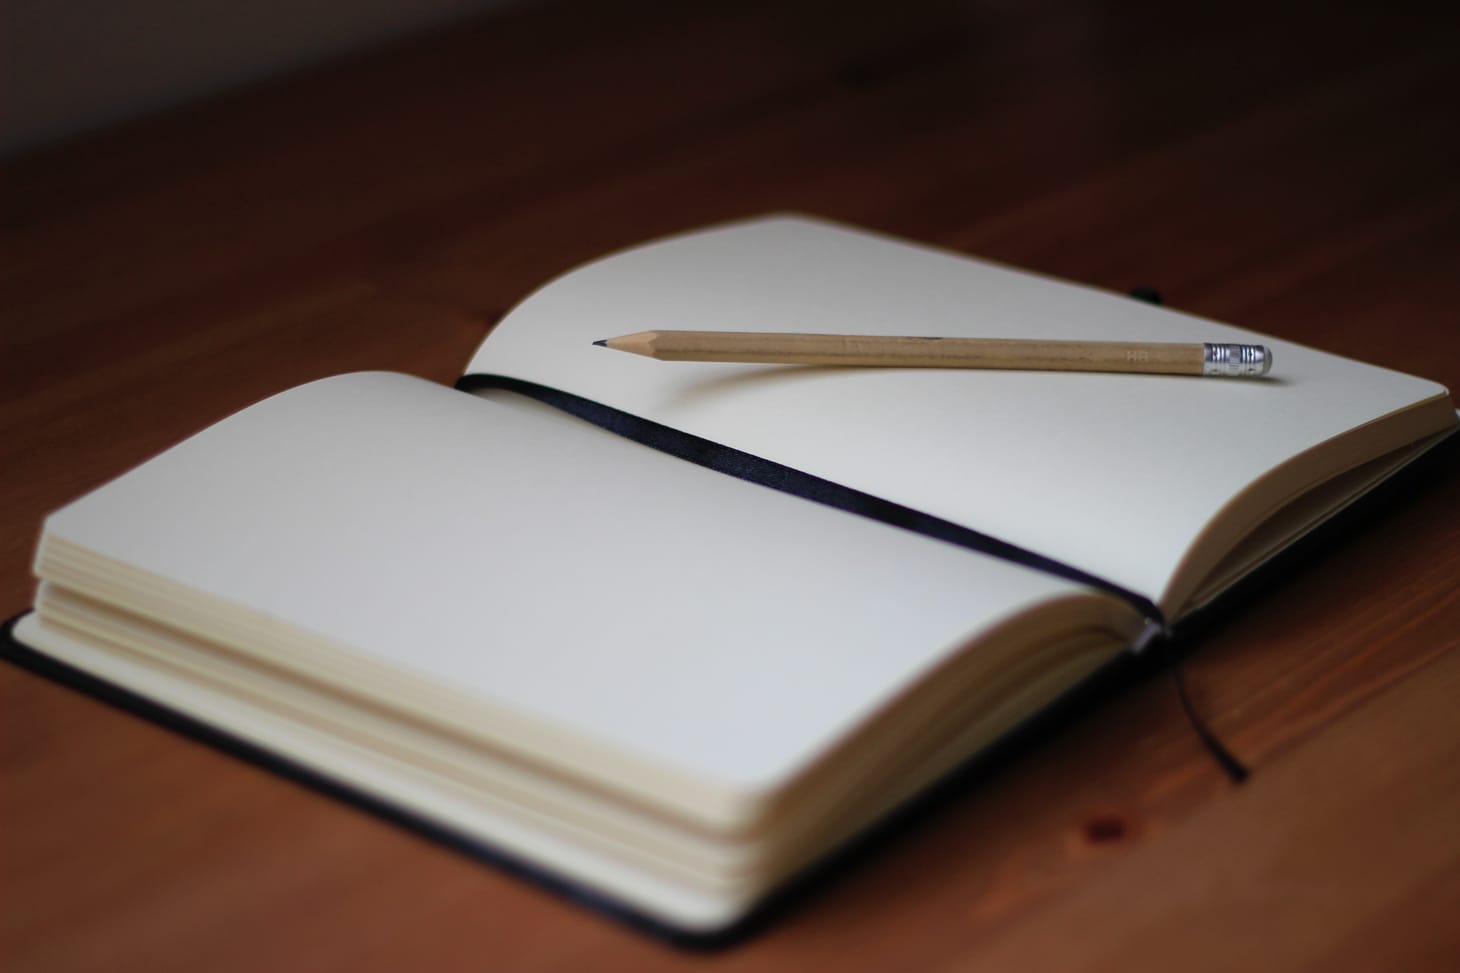 Ten reasons why writing by hand isn't going anywhere